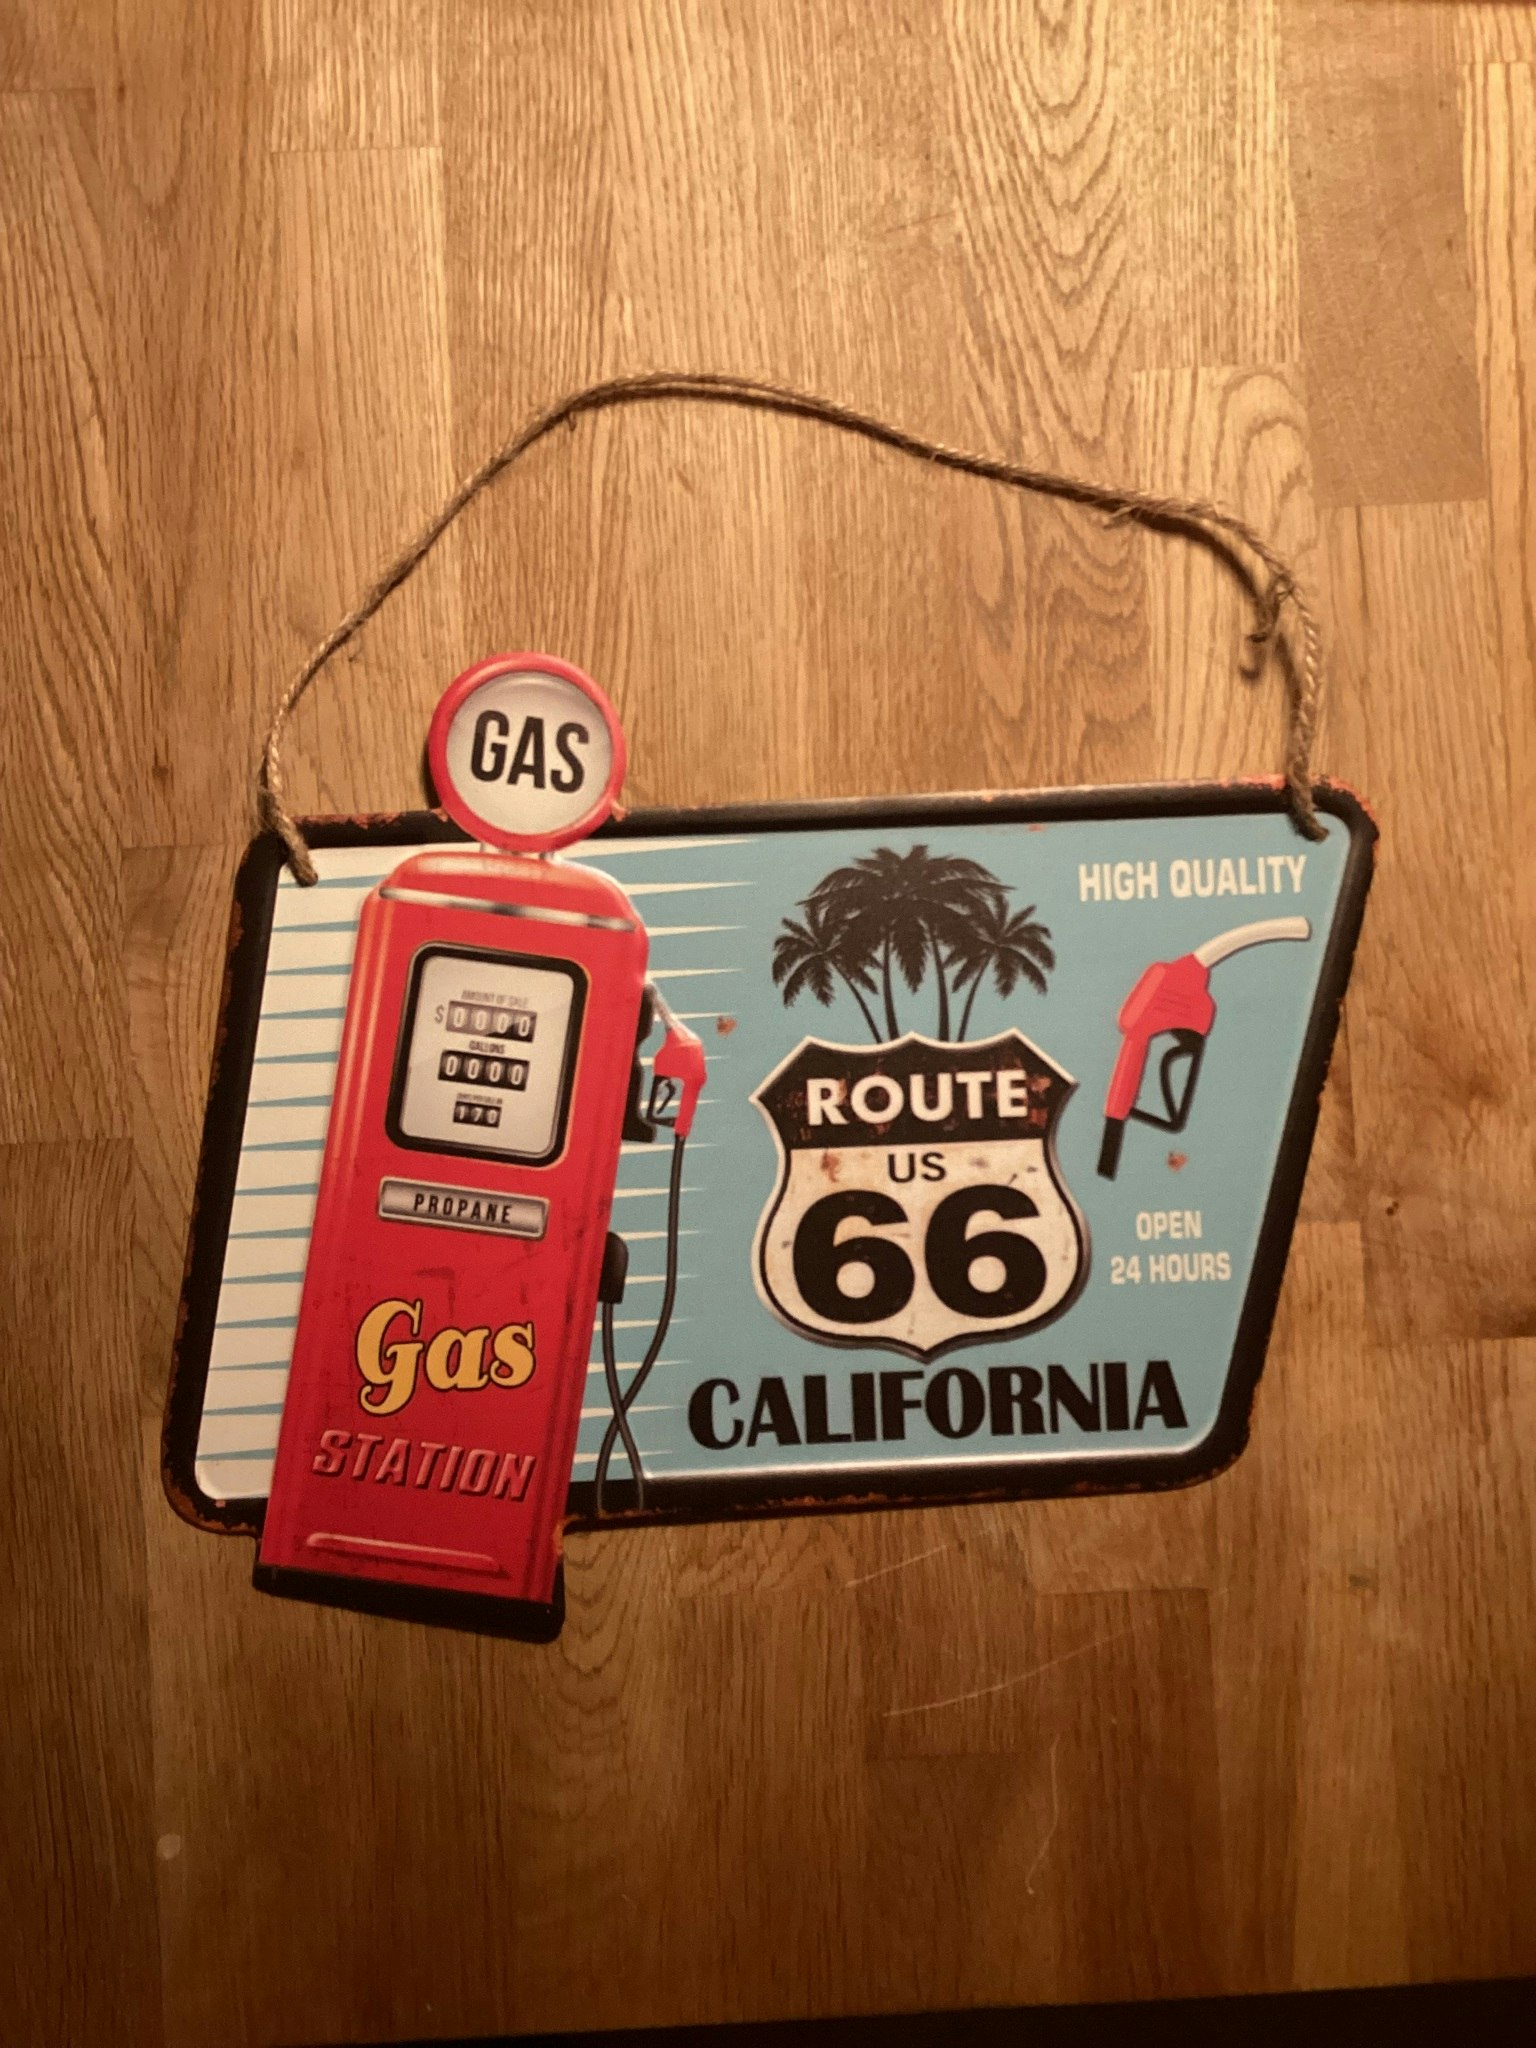 Route us 66 gas station